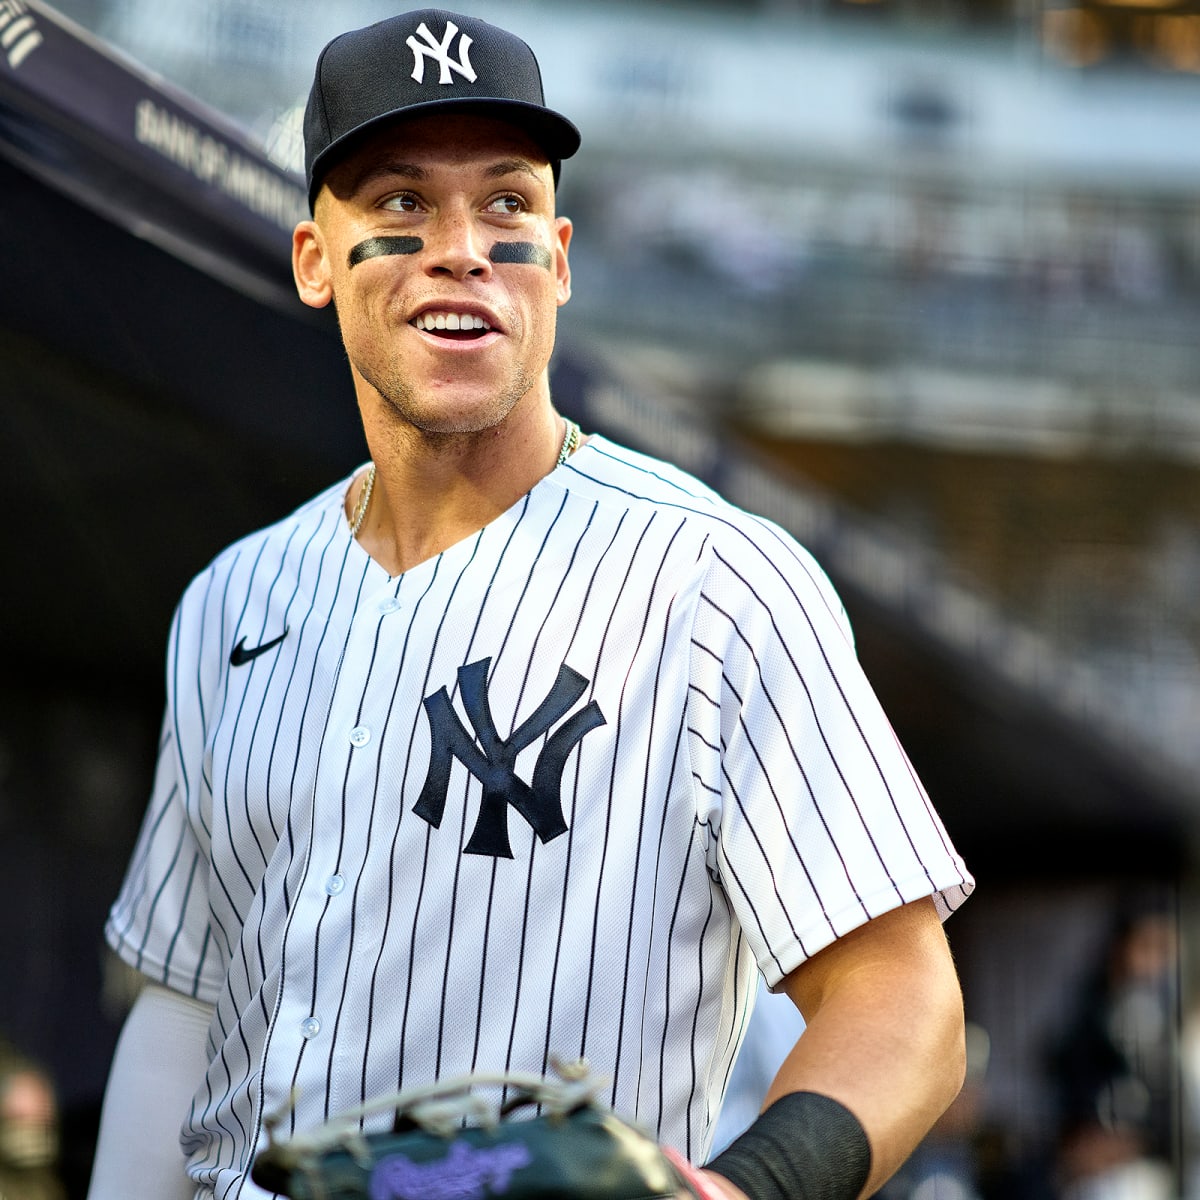 Aaron Judge's home run record: What it's like to watch him at